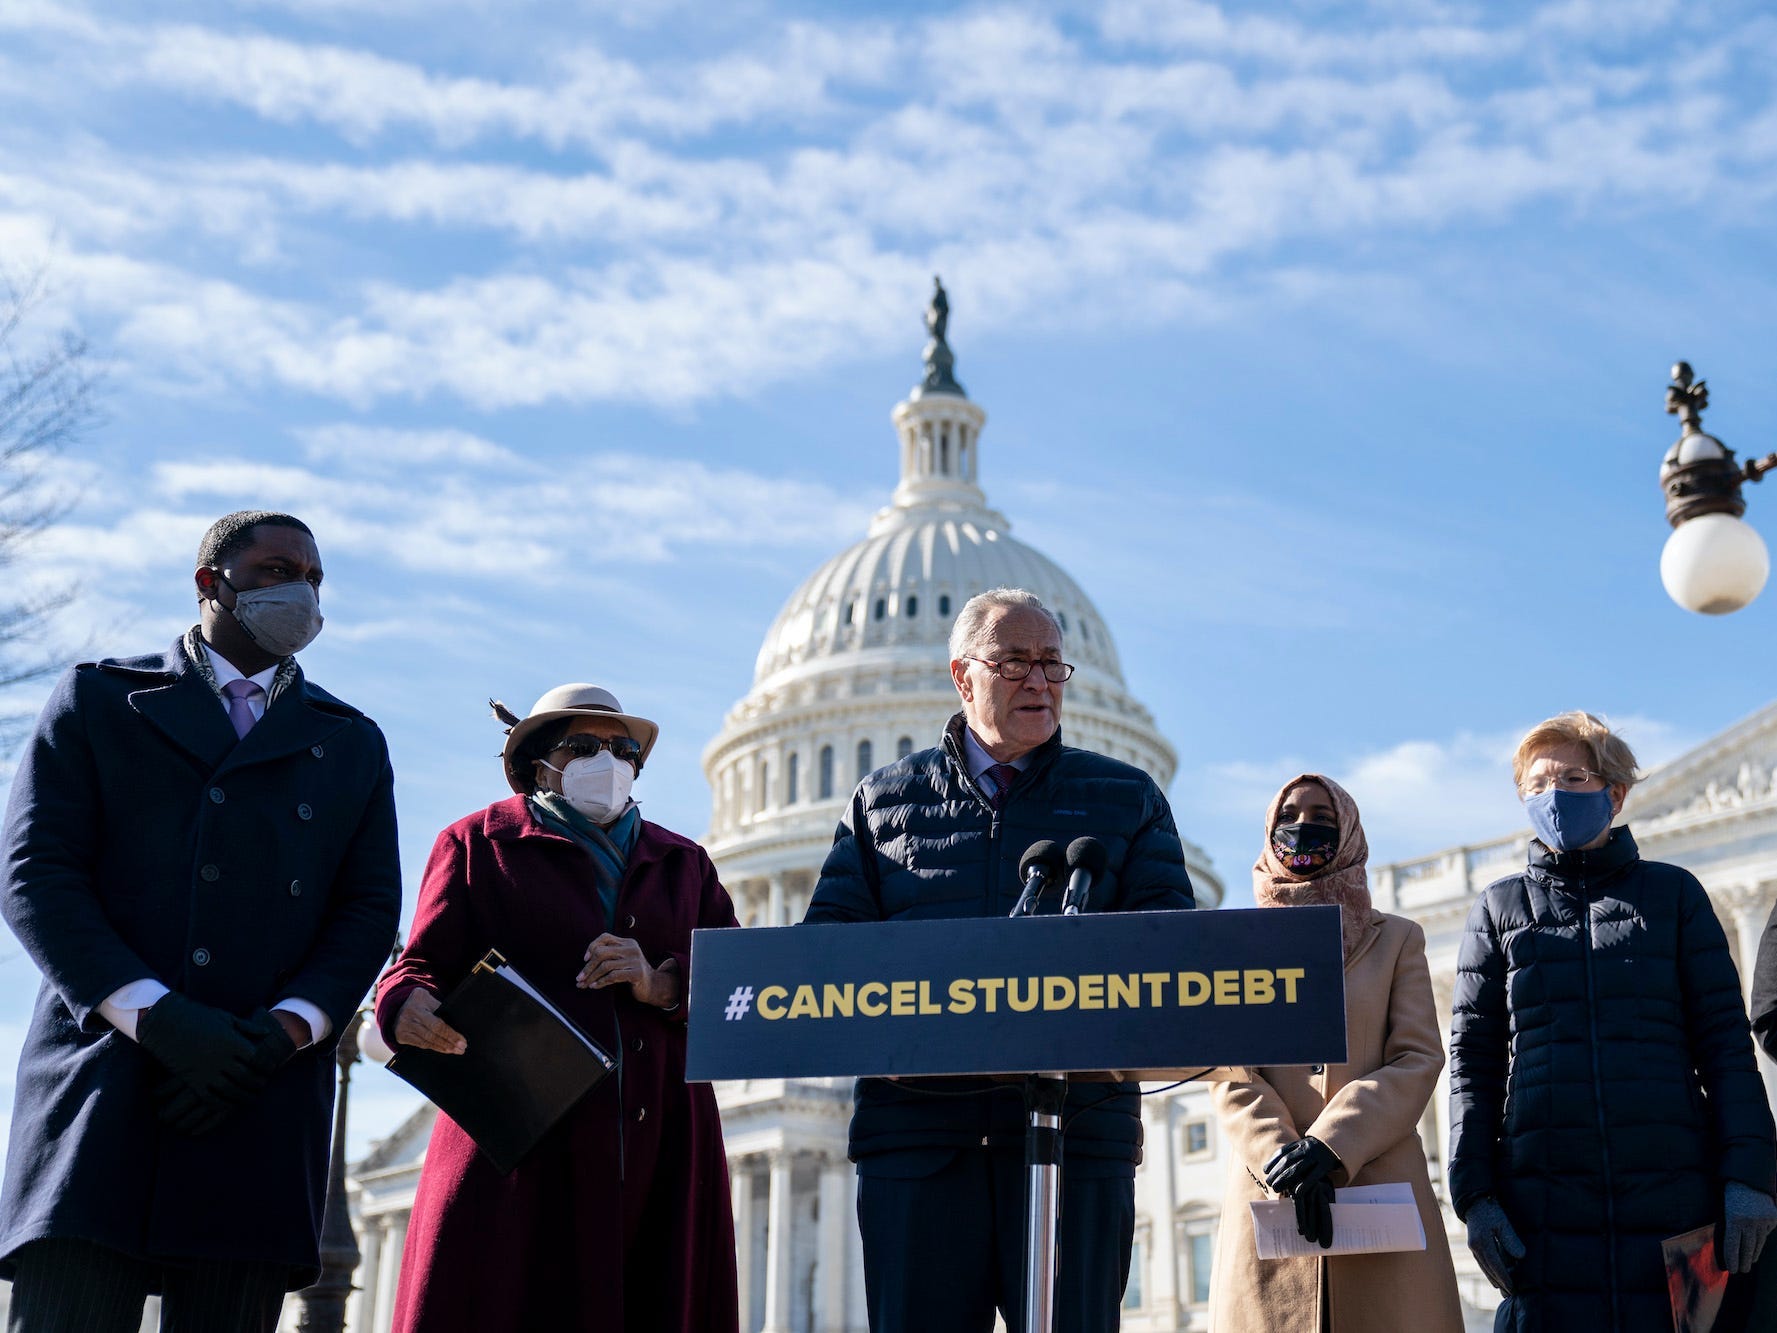 WASHINGTON, DC - FEBRUARY 4: Senate Majority Leader Chuck Schumer (D-NY) speaks during a press conference about student debt outside the U.S. Capitol on February 4, 2021 in Washington, DC. Also pictured, L-R, Rep. Mondaire Jones (D-NY), Rep. Alma Adams (D-NC), Rep. Ilhan Omar (D-MN), Sen. Elizabeth Warren (D-MA) and Rep. Ayanna Pressley (D-MA). The group of Democrats re-introduced their resolution calling on President Joe Biden to take executive action to cancel up to $50,000 in debt for federal student loan borrowers.